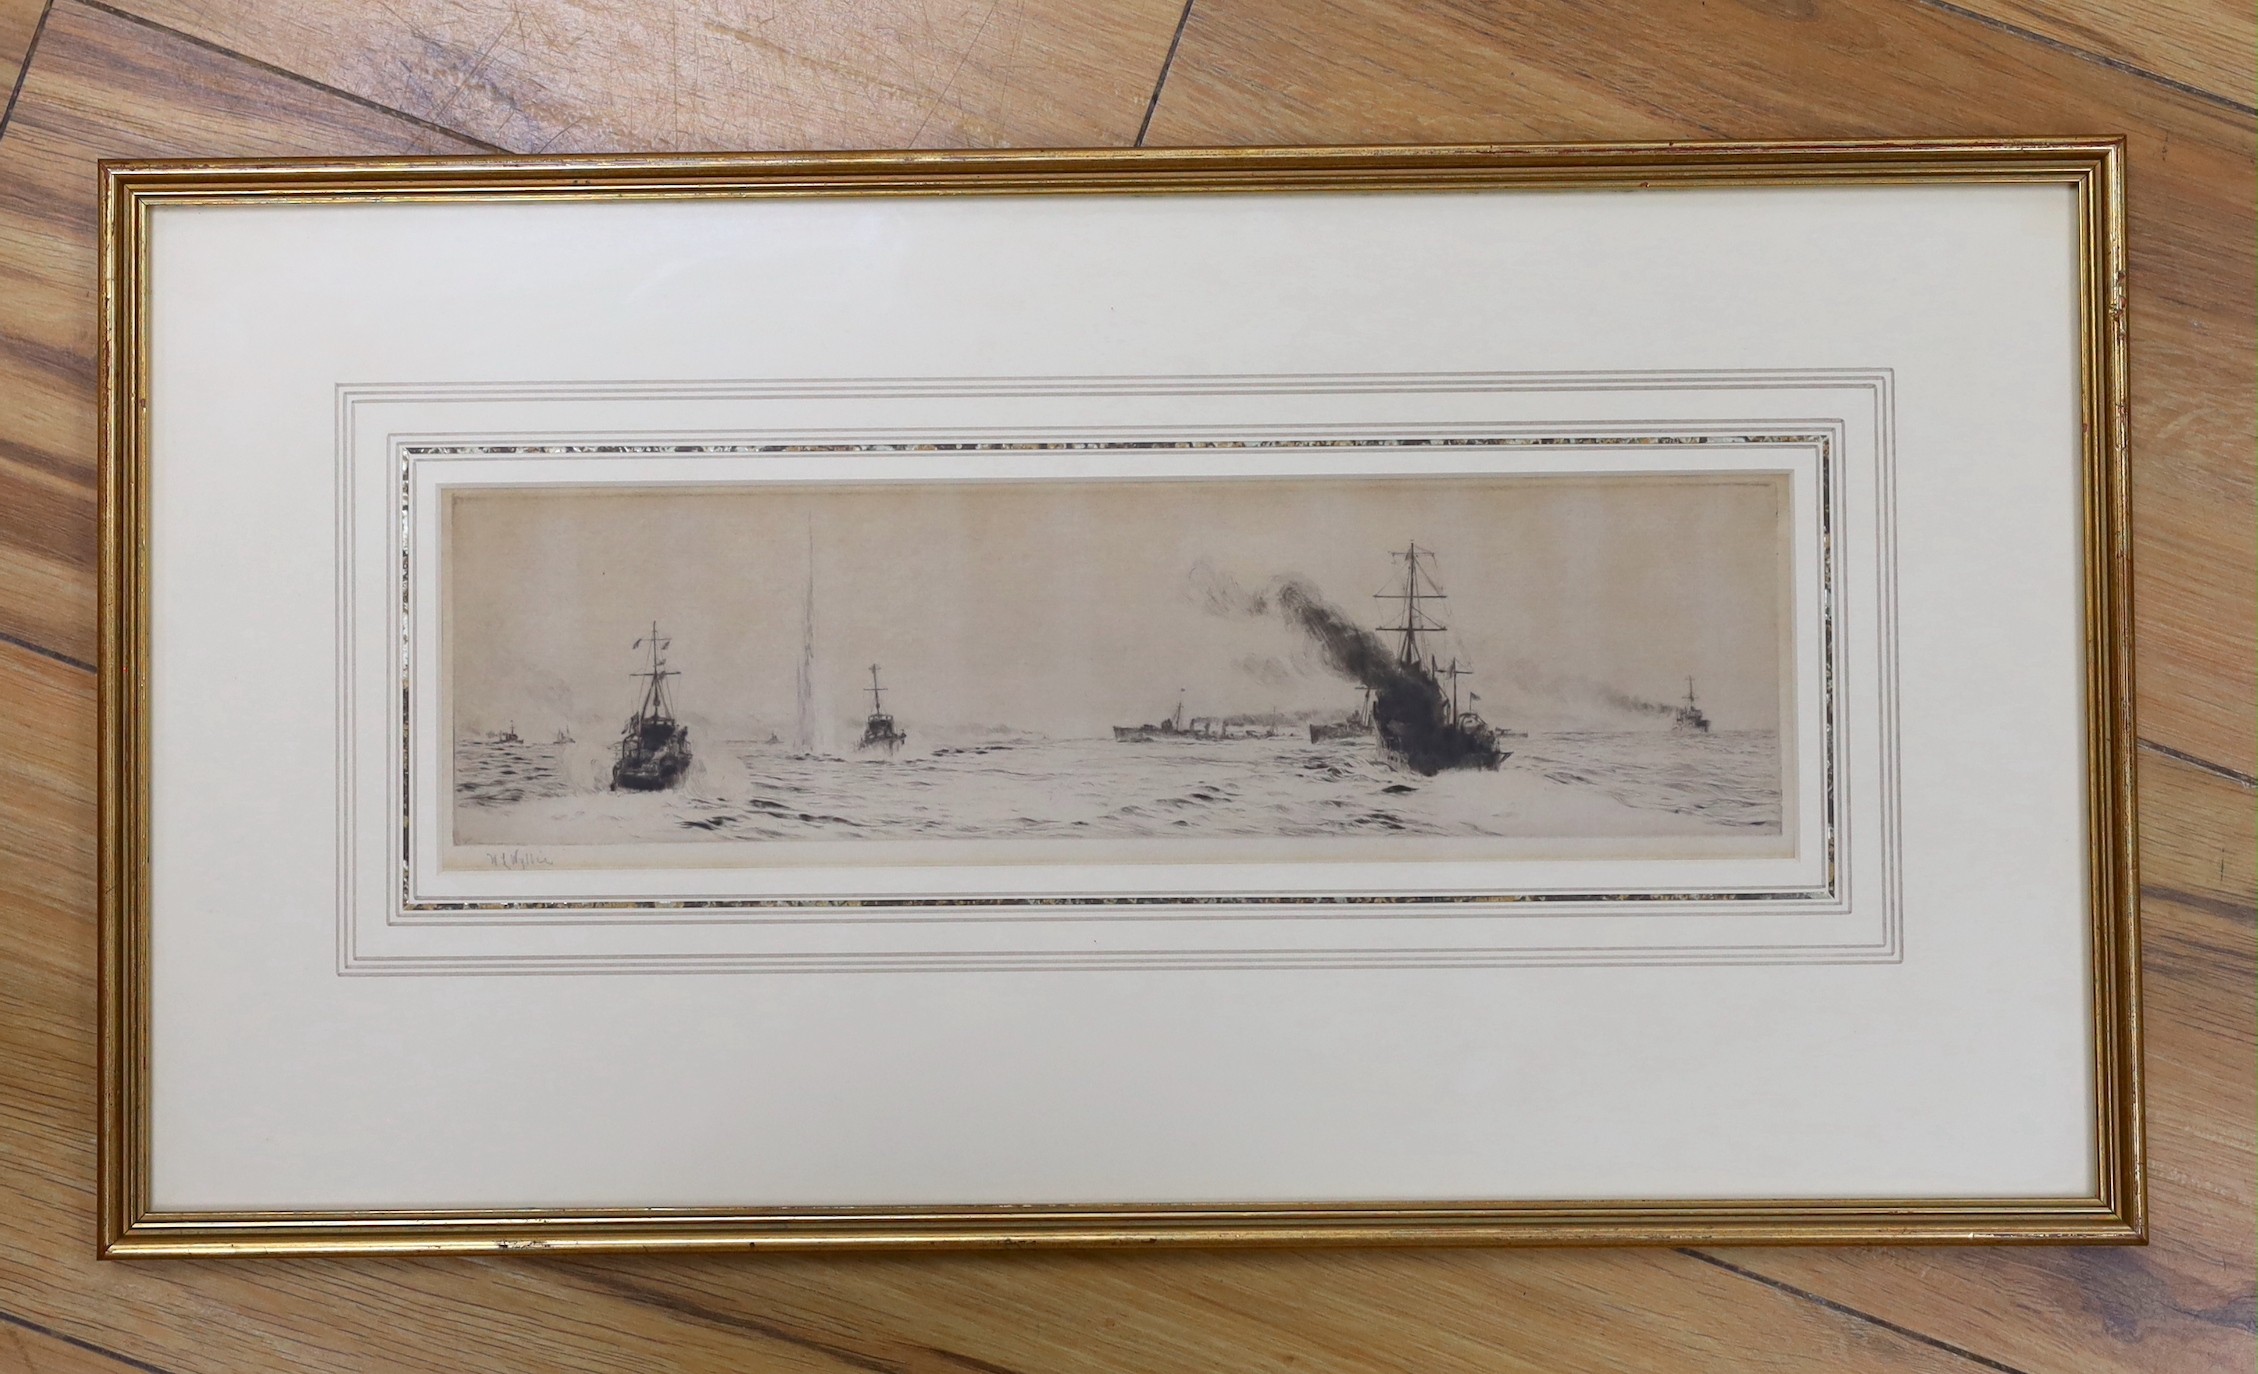 William Lionel Wyllie (1851-1931), drypoint etching, 'Torpedo boats hunting for U-boats (Battle of Jutland), signed in pencil, 9 x 33cm